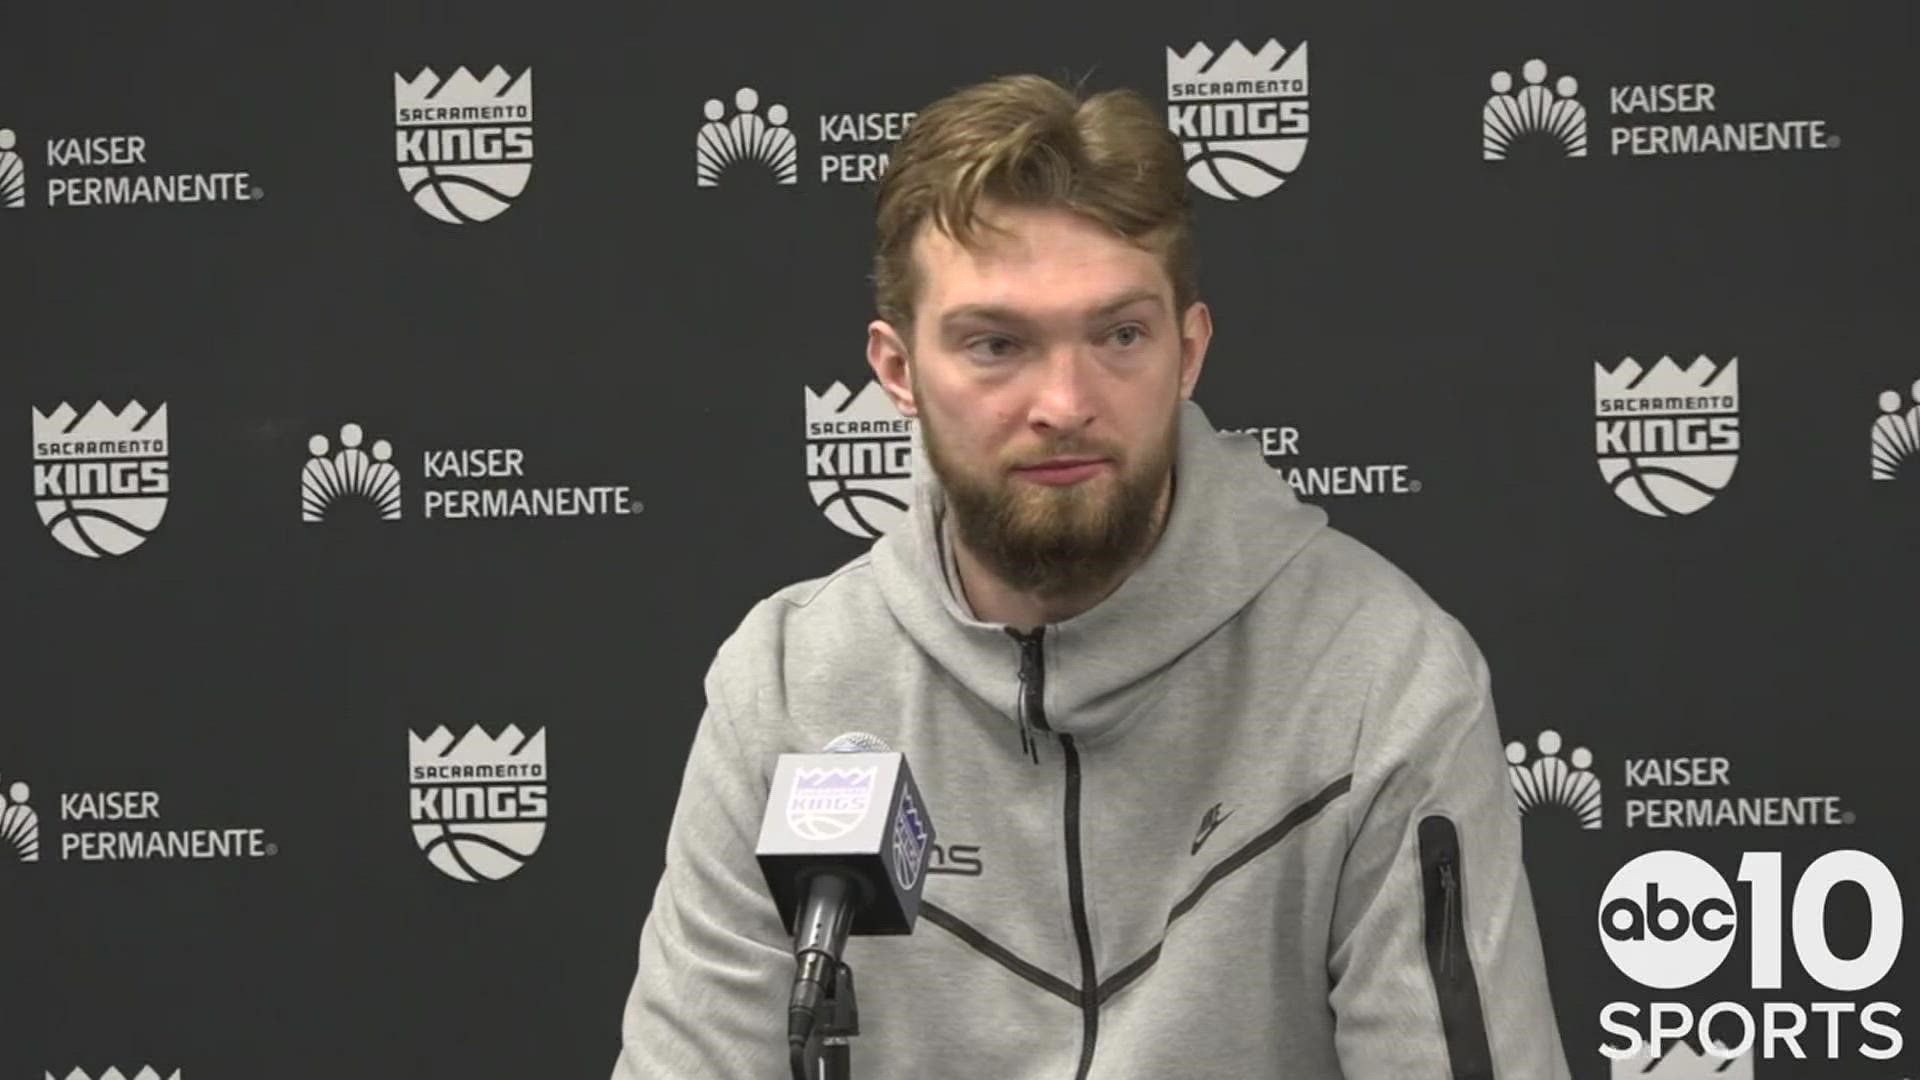 Domantas Sabonis, meeting with the media one day after the season's final game, on the dismissal of interim coach Alvin Gentry and what's ahead for his Kings.